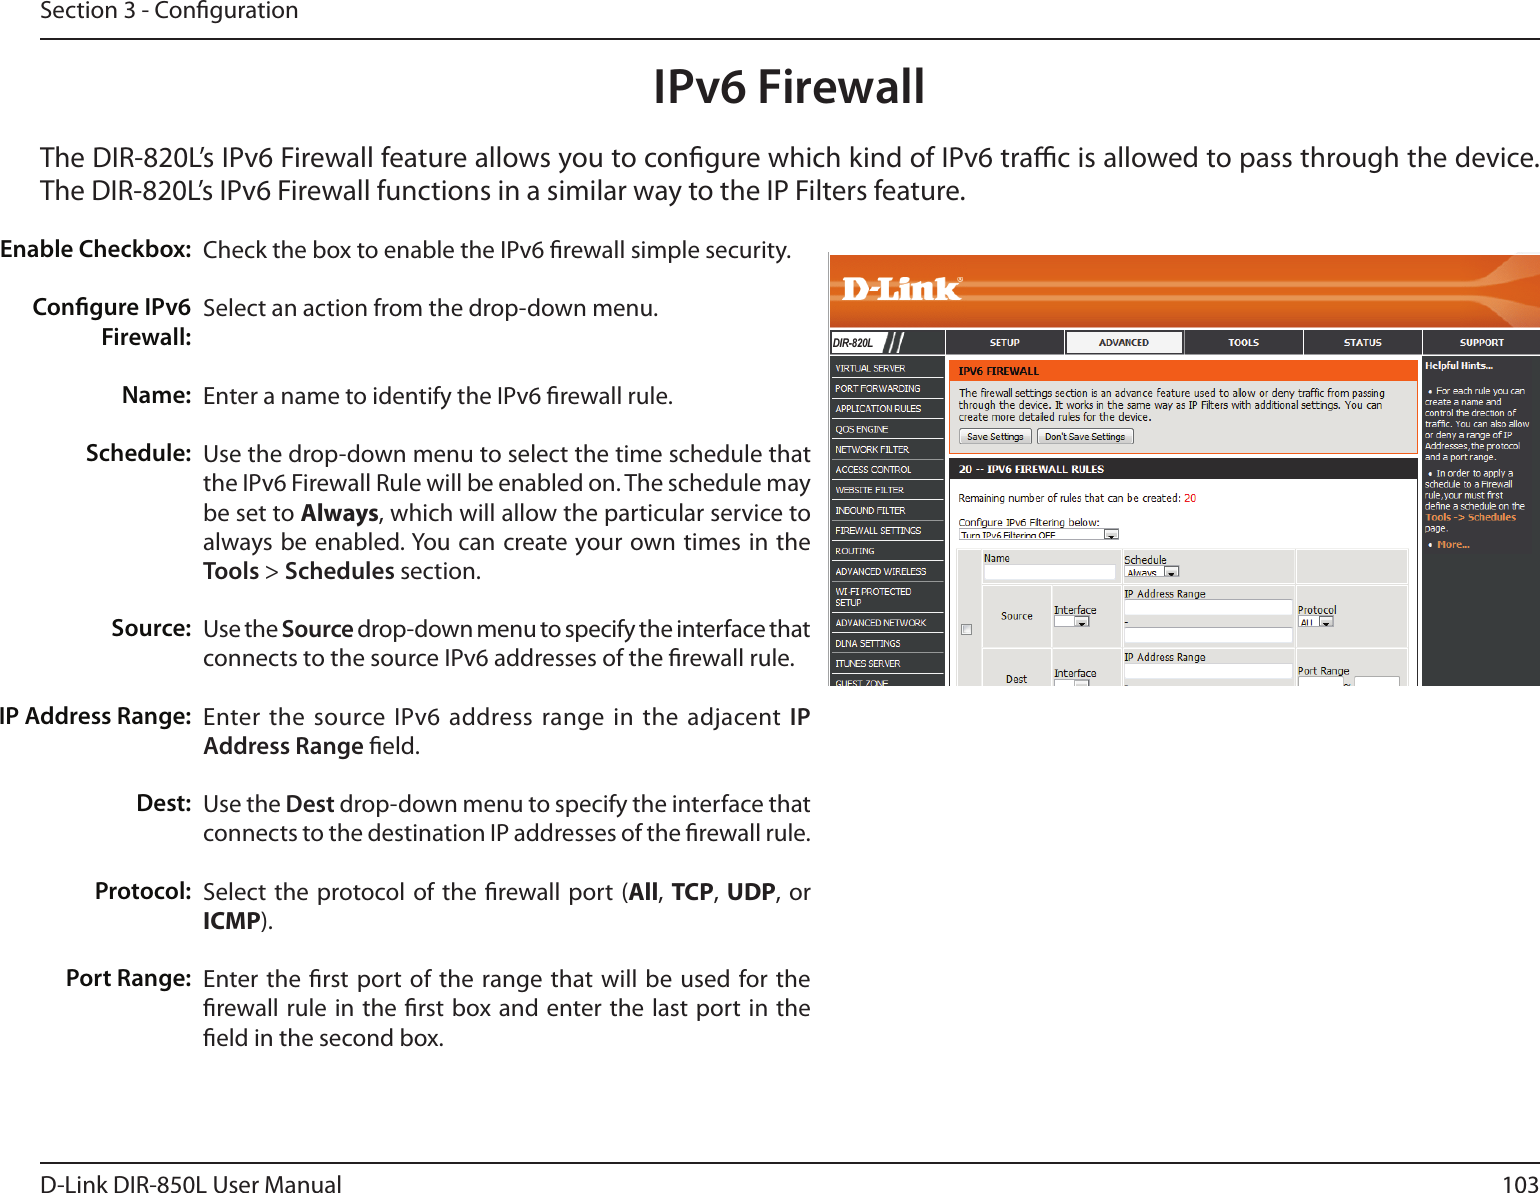 103D-Link DIR-850L User ManualSection 3 - CongurationIPv6 FirewallThe DIR-820L’s IPv6 Firewall feature allows you to congure which kind of IPv6 trac is allowed to pass through the device. The DIR-820L’s IPv6 Firewall functions in a similar way to the IP Filters feature.Check the box to enable the IPv6 rewall simple security.Select an action from the drop-down menu.Enter a name to identify the IPv6 rewall rule.Use the drop-down menu to select the time schedule that the IPv6 Firewall Rule will be enabled on. The schedule may be set to Always, which will allow the particular service to always be enabled. You can create your own times in the Tools &gt; Schedules section. Use the Source drop-down menu to specify the interface that connects to the source IPv6 addresses of the rewall rule. Enter the source IPv6 address range  in the adjacent IP Address Range eld.Use the Dest drop-down menu to specify the interface that connects to the destination IP addresses of the rewall rule. Select  the protocol of the rewall port (All, TCP, UDP, or ICMP).Enter the rst port  of the range  that will be used  for the rewall rule in the rst box and enter the last port in  the eld in the second box.Enable Checkbox:Congure IPv6 Firewall:Name:Schedule:Source:IP Address Range:Dest:   Protocol:Port Range:DIR-820L